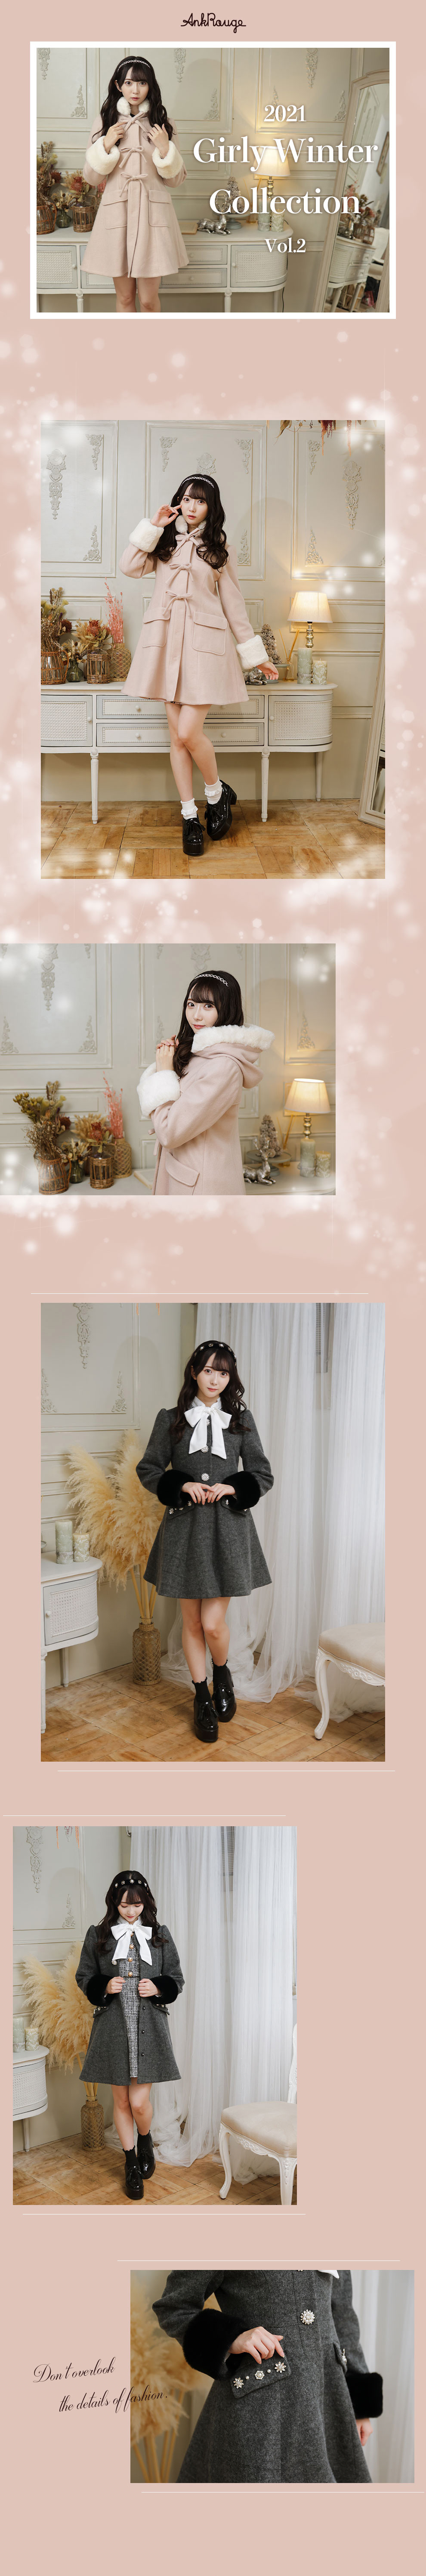 2021 Girly Winter Collection Vol.2